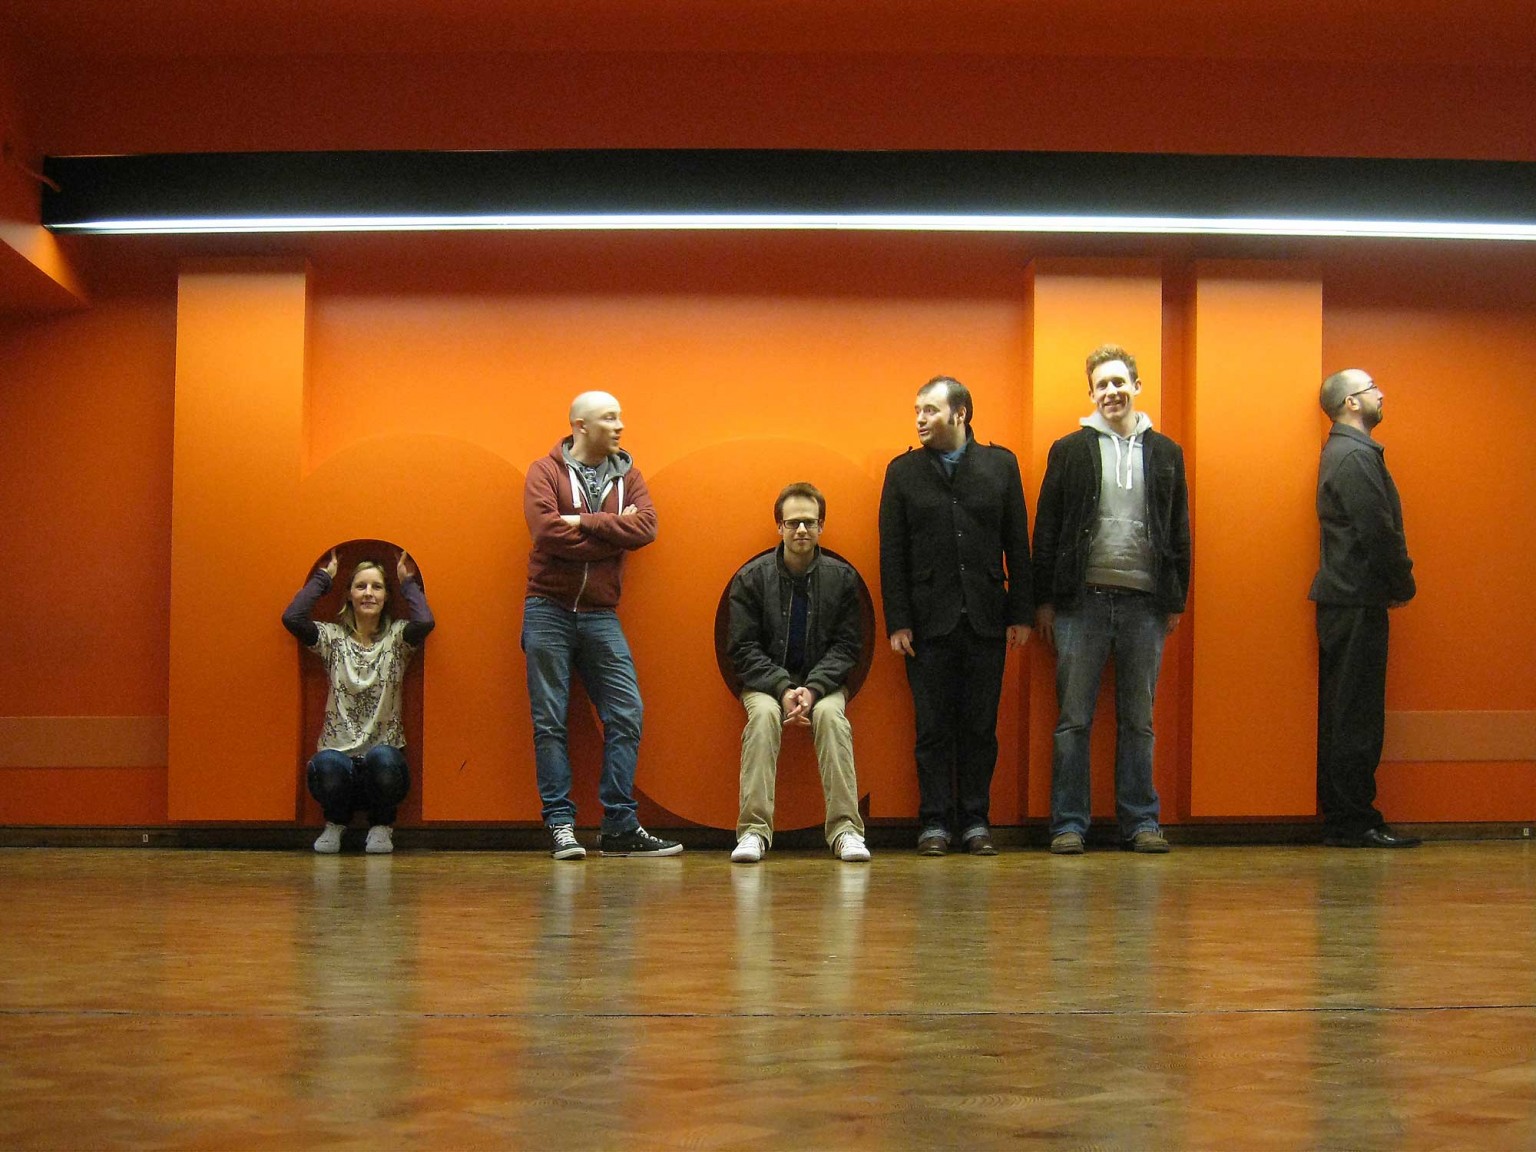 The Cog team, posing in the foyer.